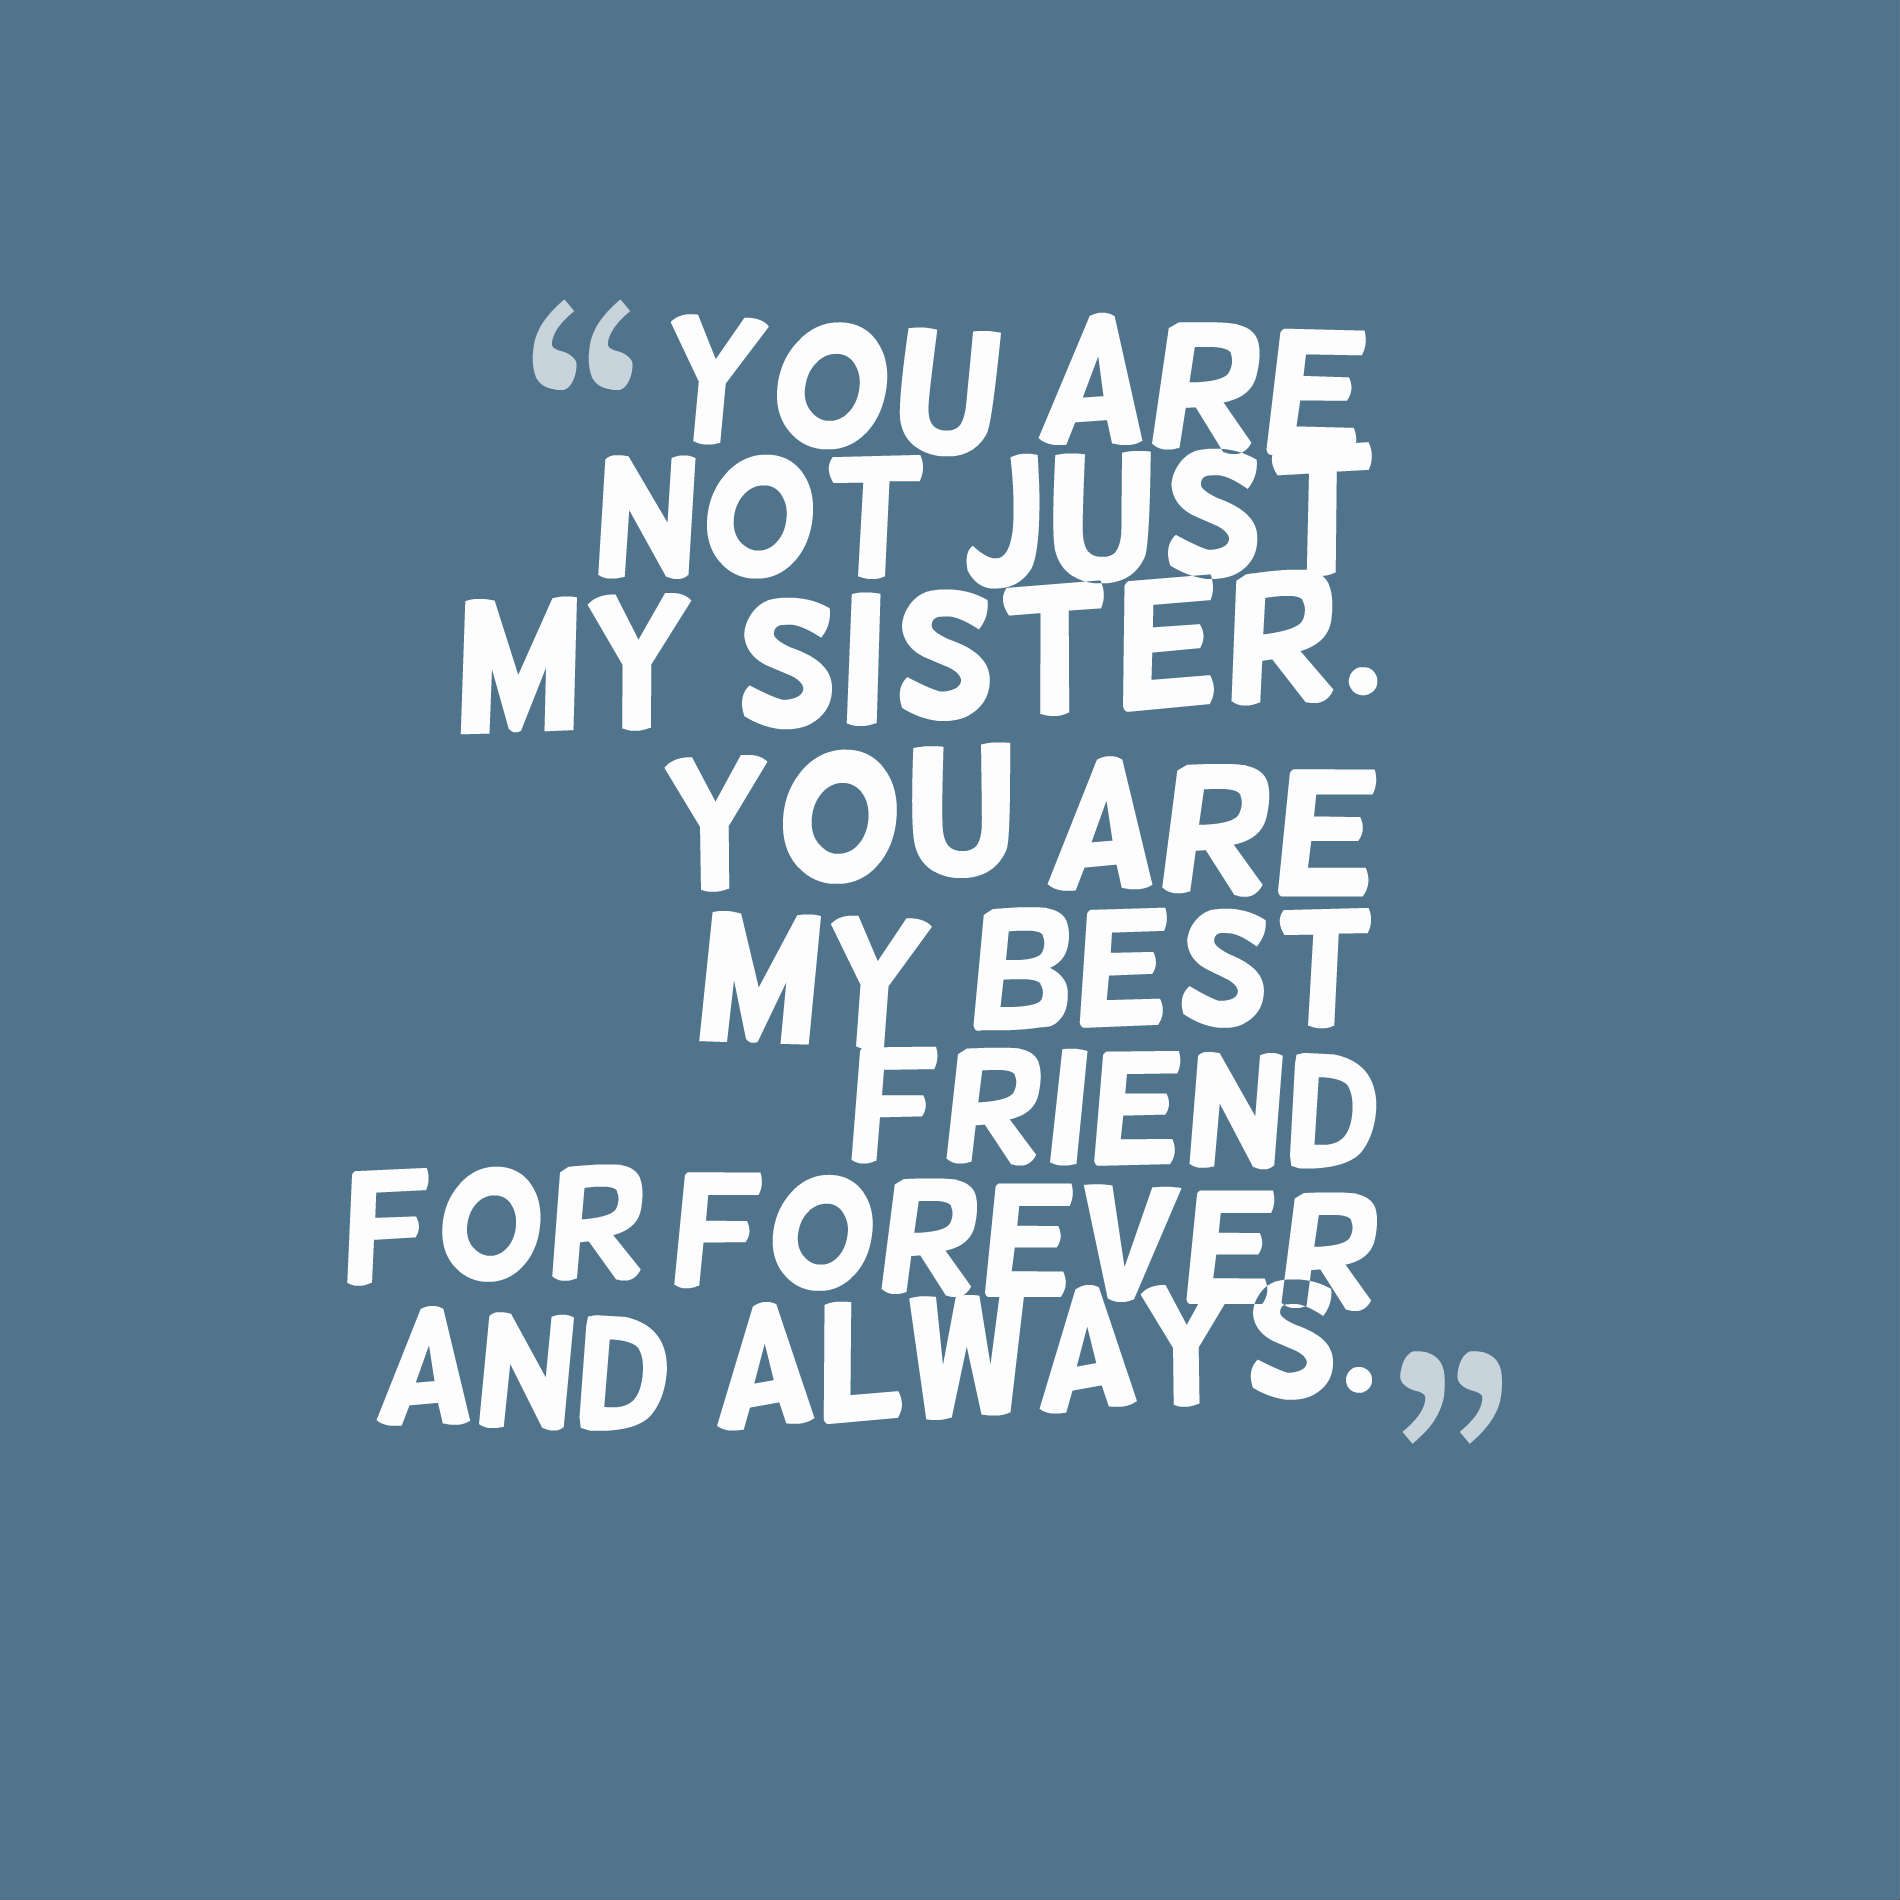 You are not just my sister. You are my best friend for forever and always.